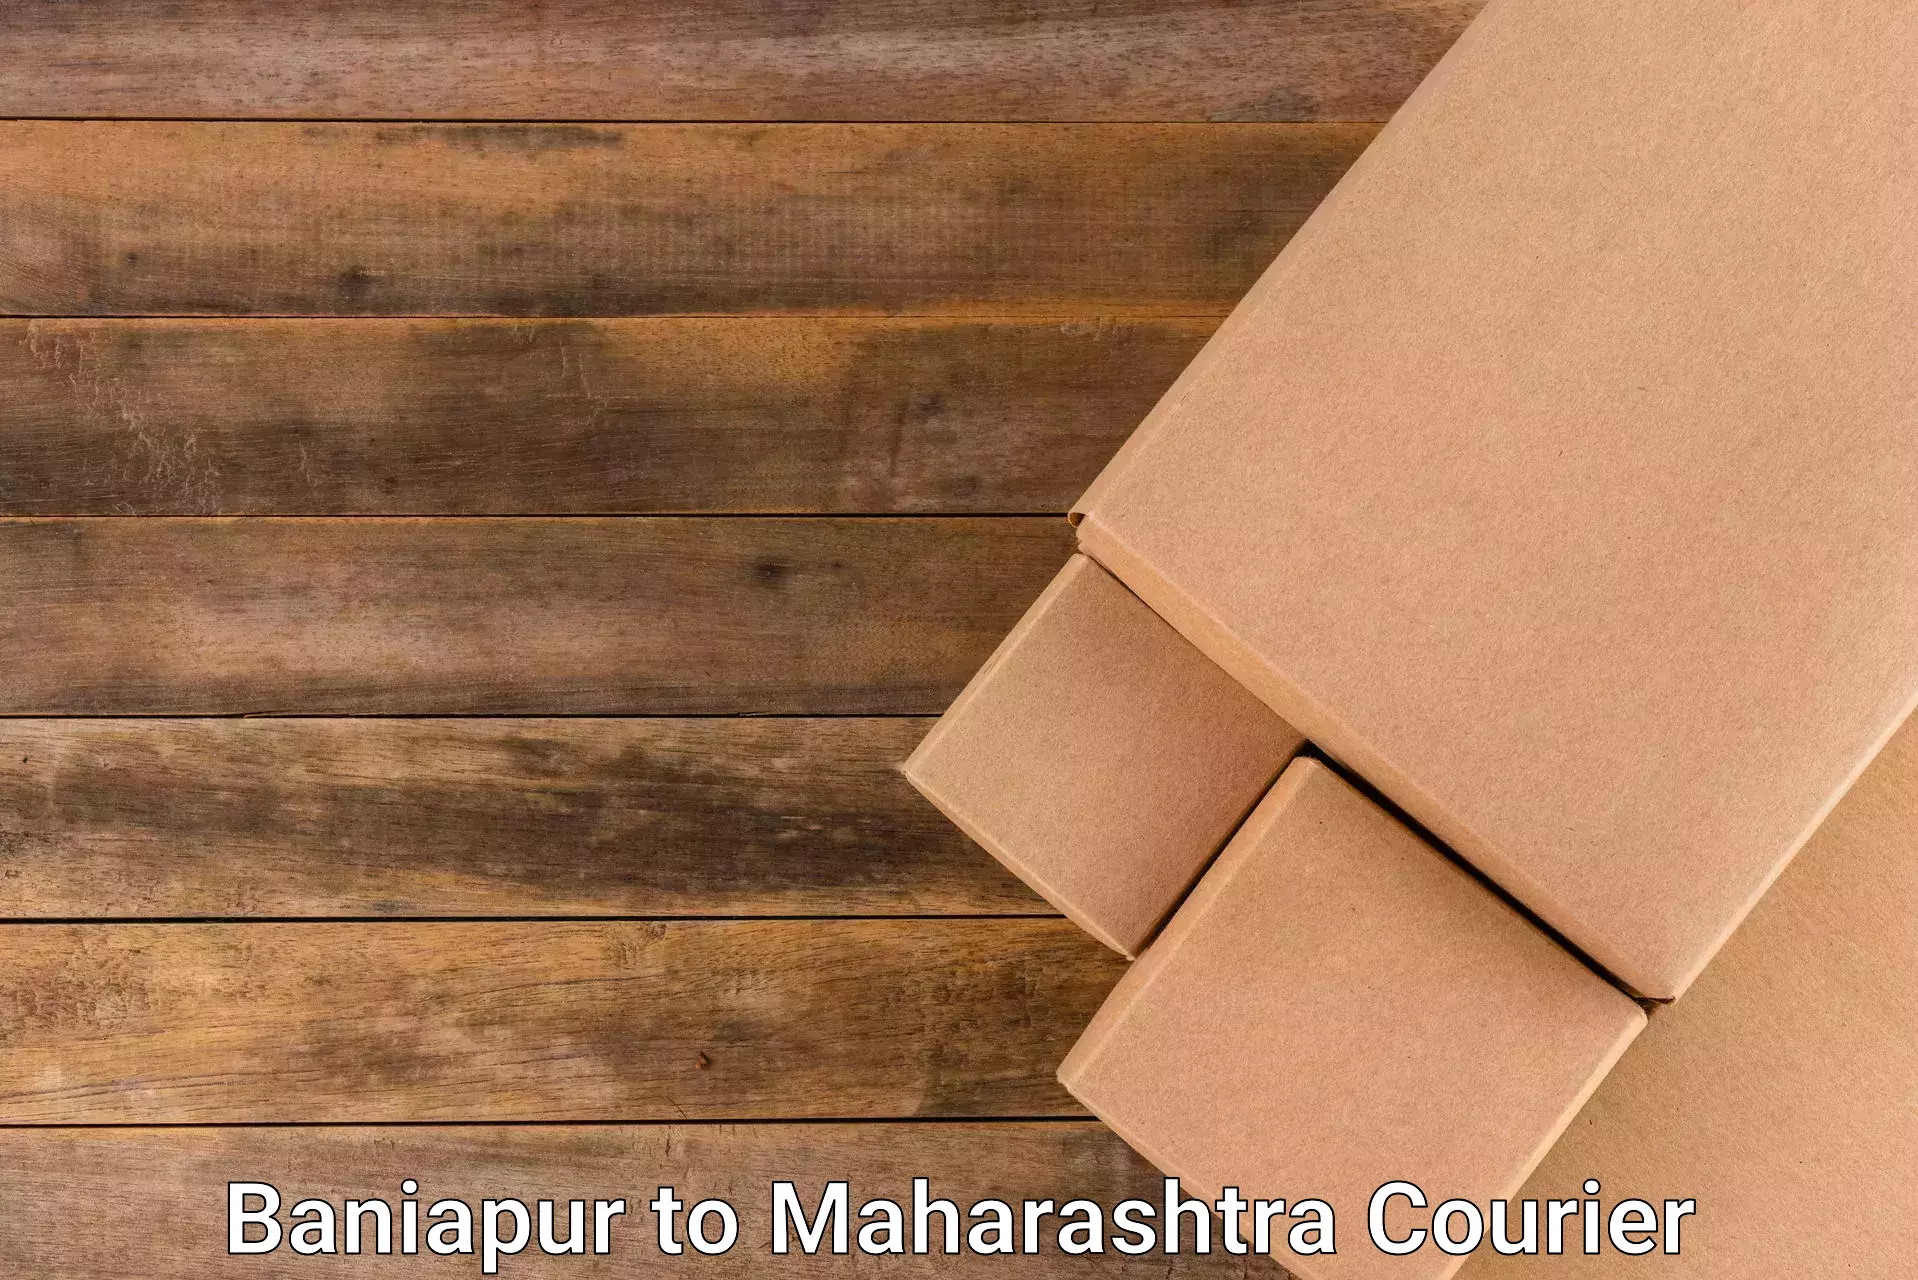 Postal and courier services in Baniapur to Jawaharlal Nehru Port Nhava Sheva